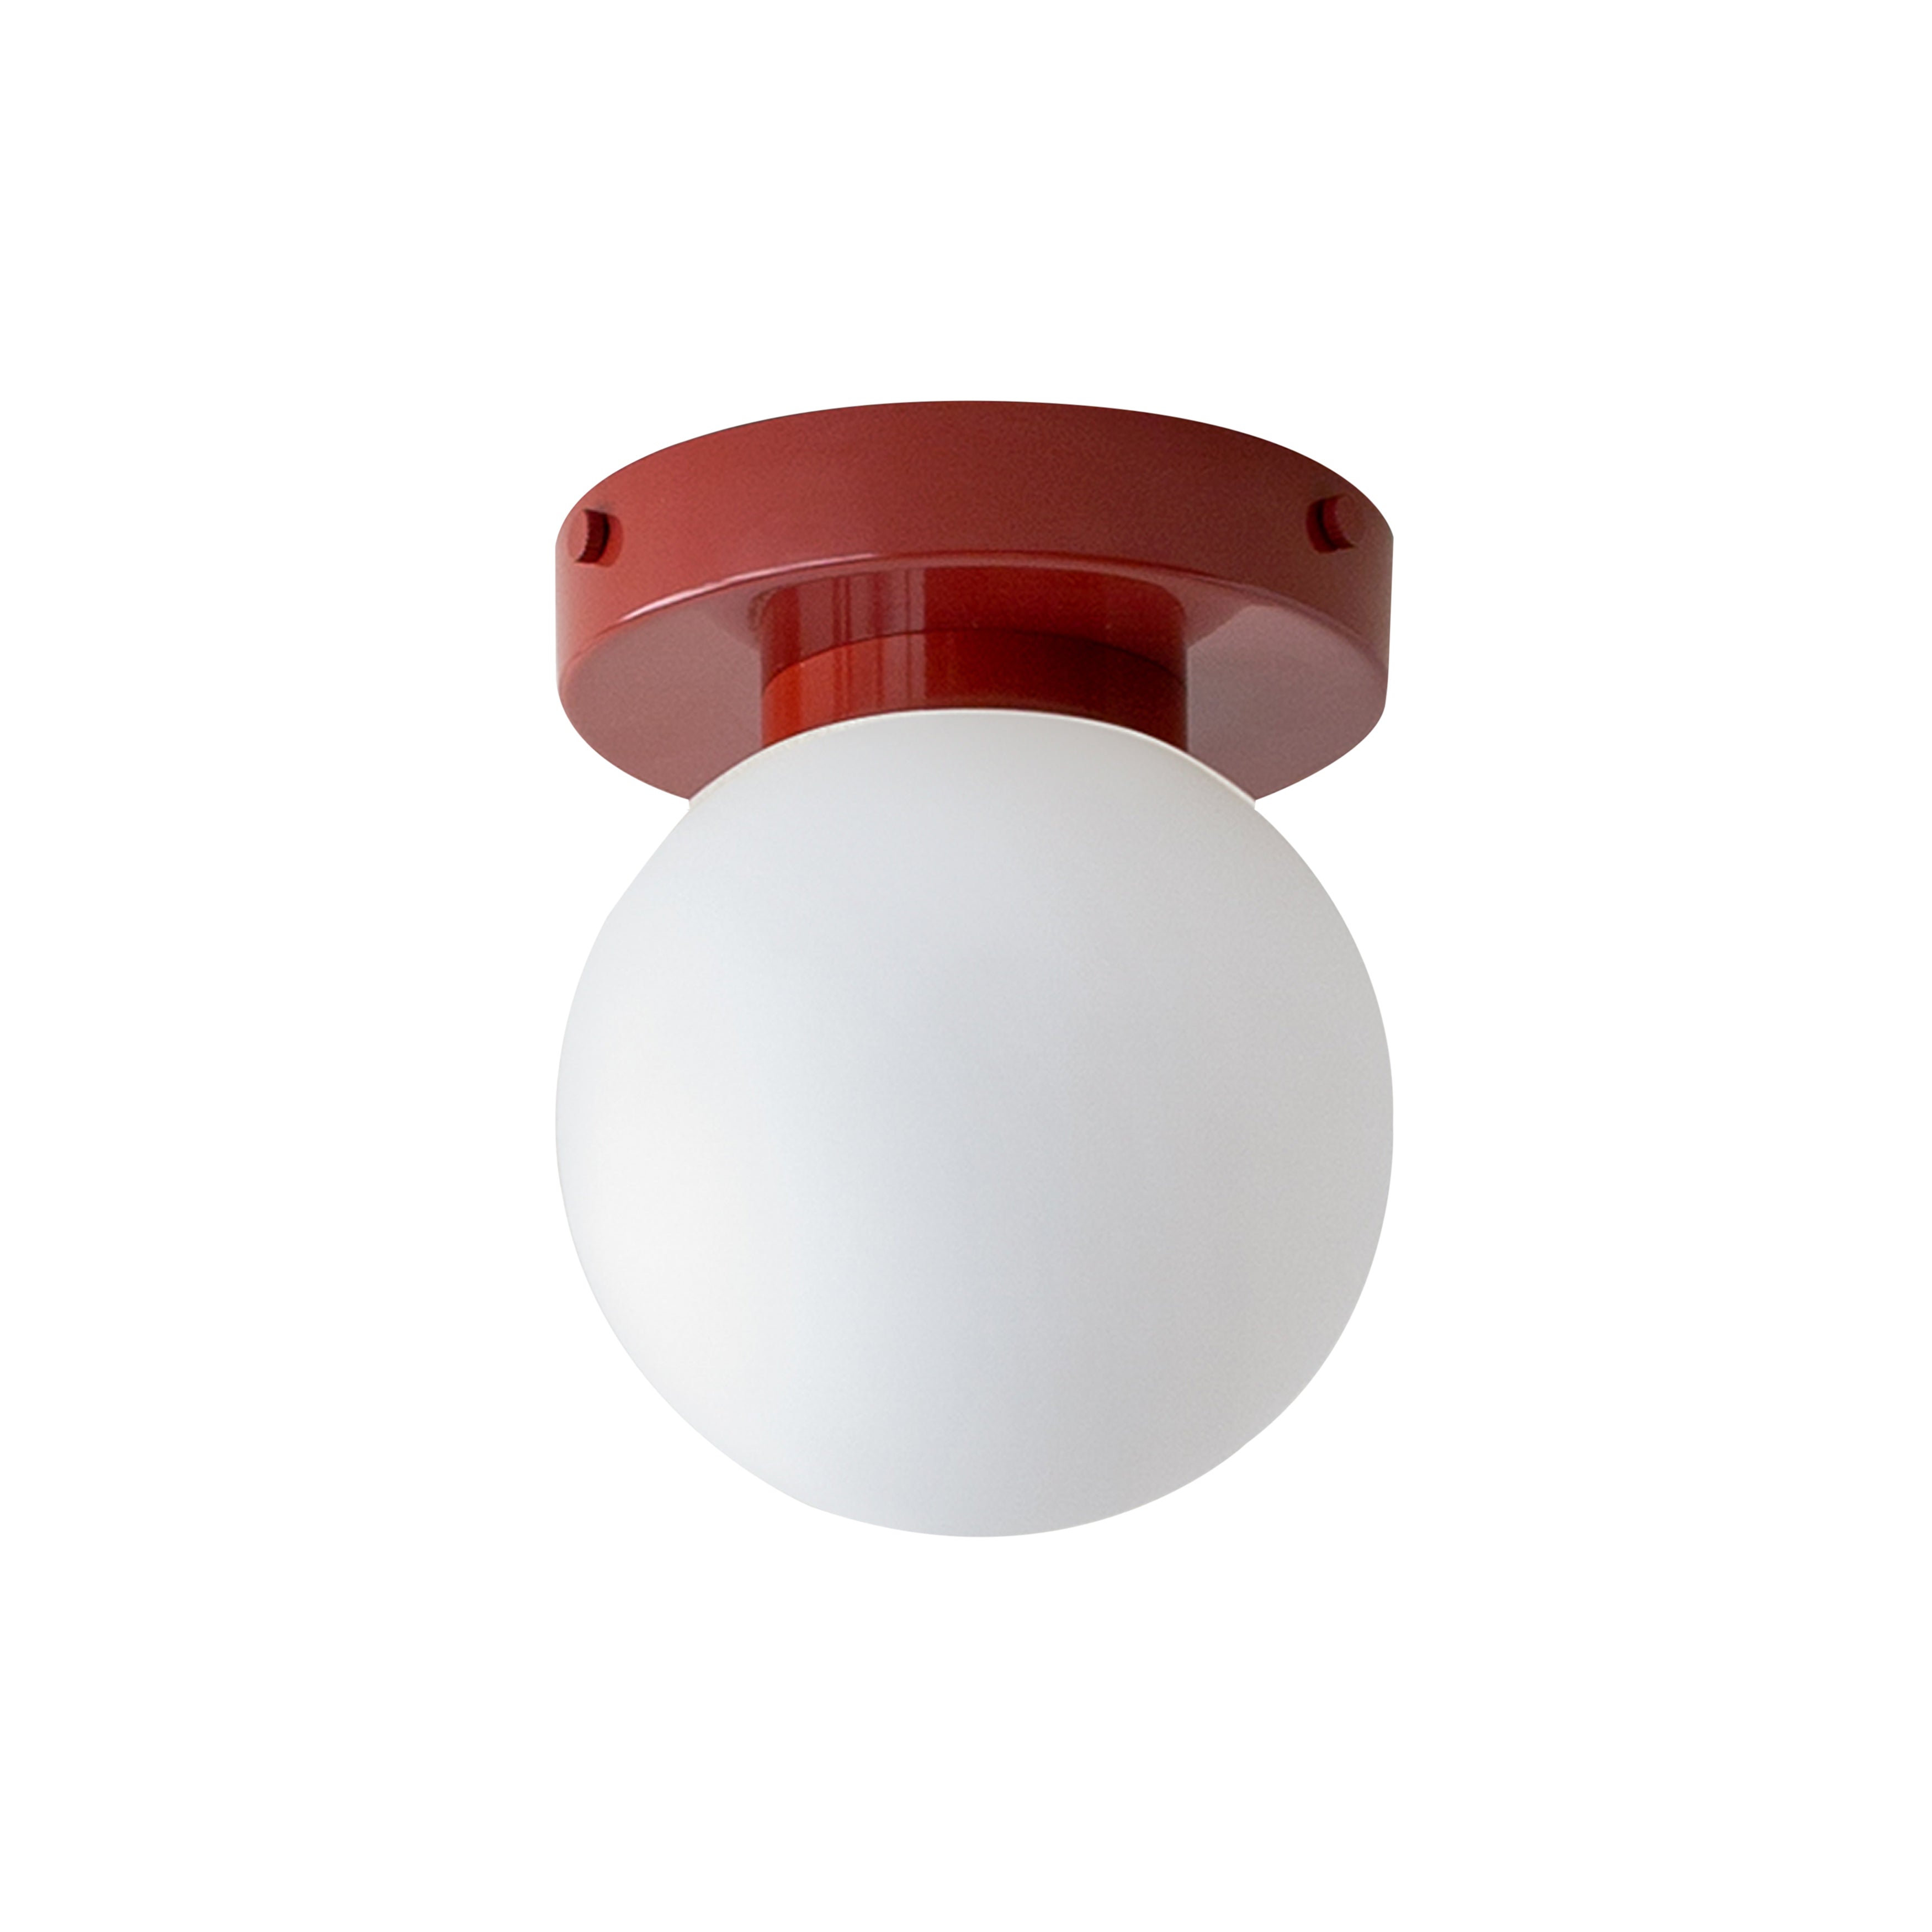 Orb 5 Surface Mount: Oxide Red